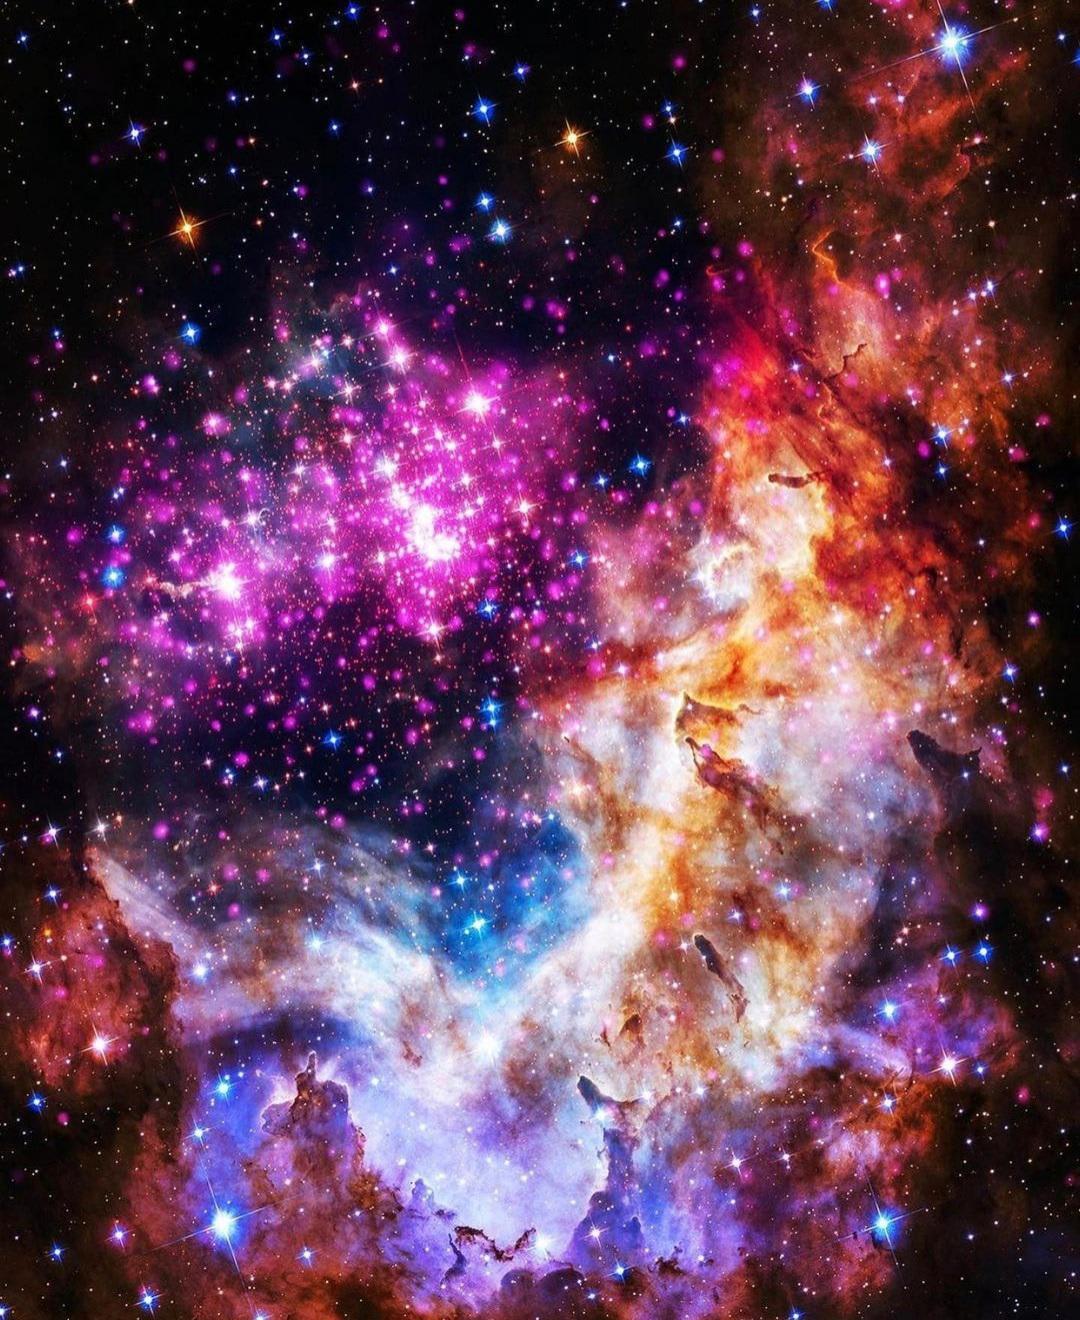 The Westerlund 2 Star Cluster. A cluster of stars about 1 or 2 million years old. It contains some of the most hottest and massive stars known. There is about 3,000 stars in the cluster.